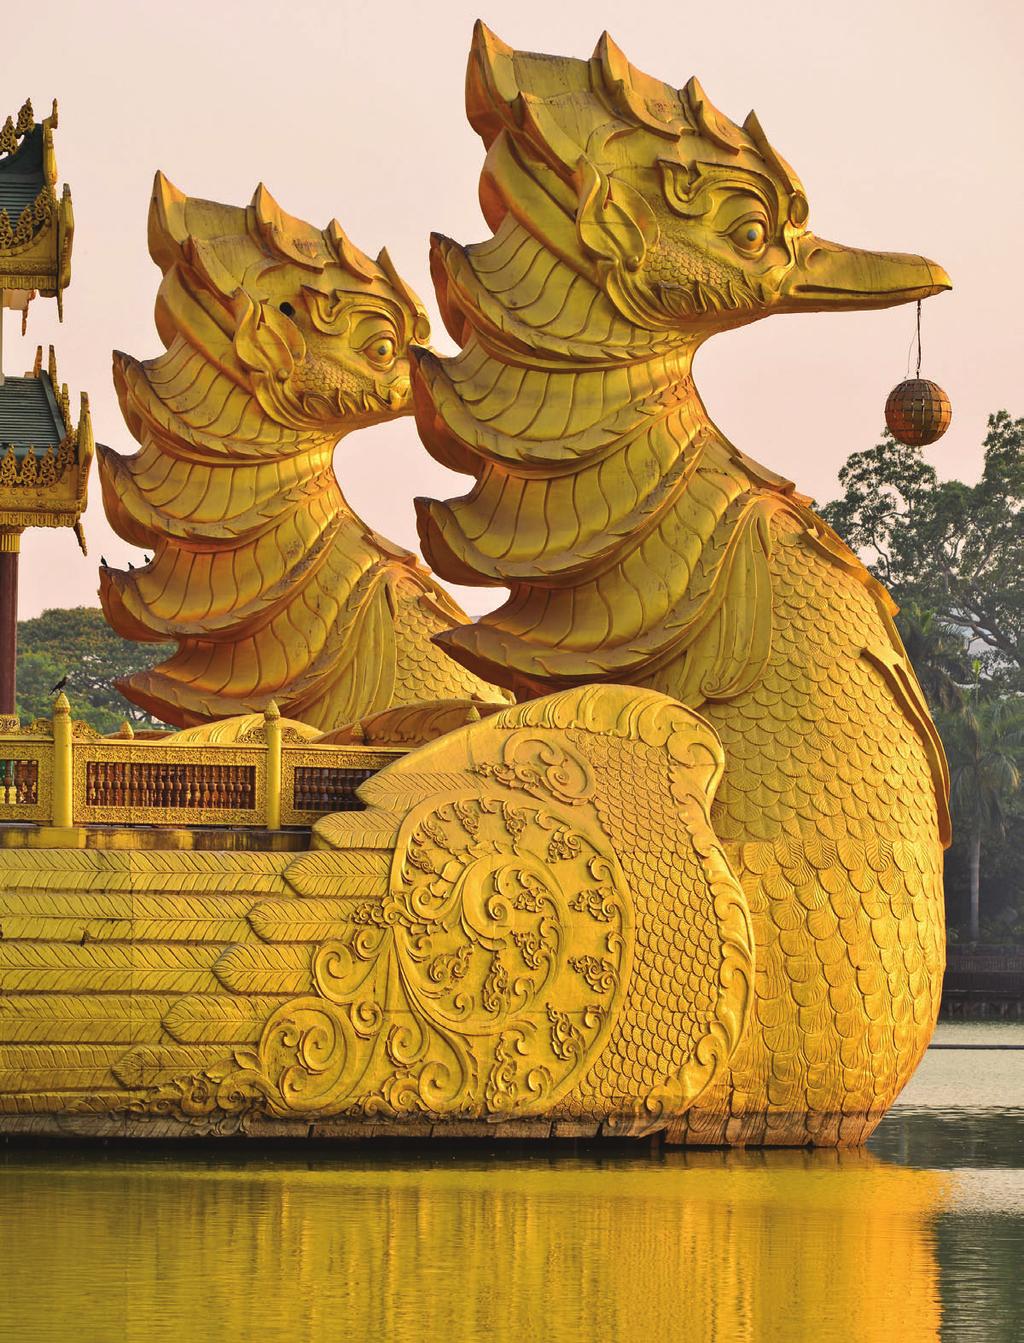 Golden Myanmar Yangon and a Cruise to Mandalay November 10 24, 2014: 15 days, 11 nights A nine-night cruise up the Irrawaddy River to Mandalay reveals a land that has been virtually closed to